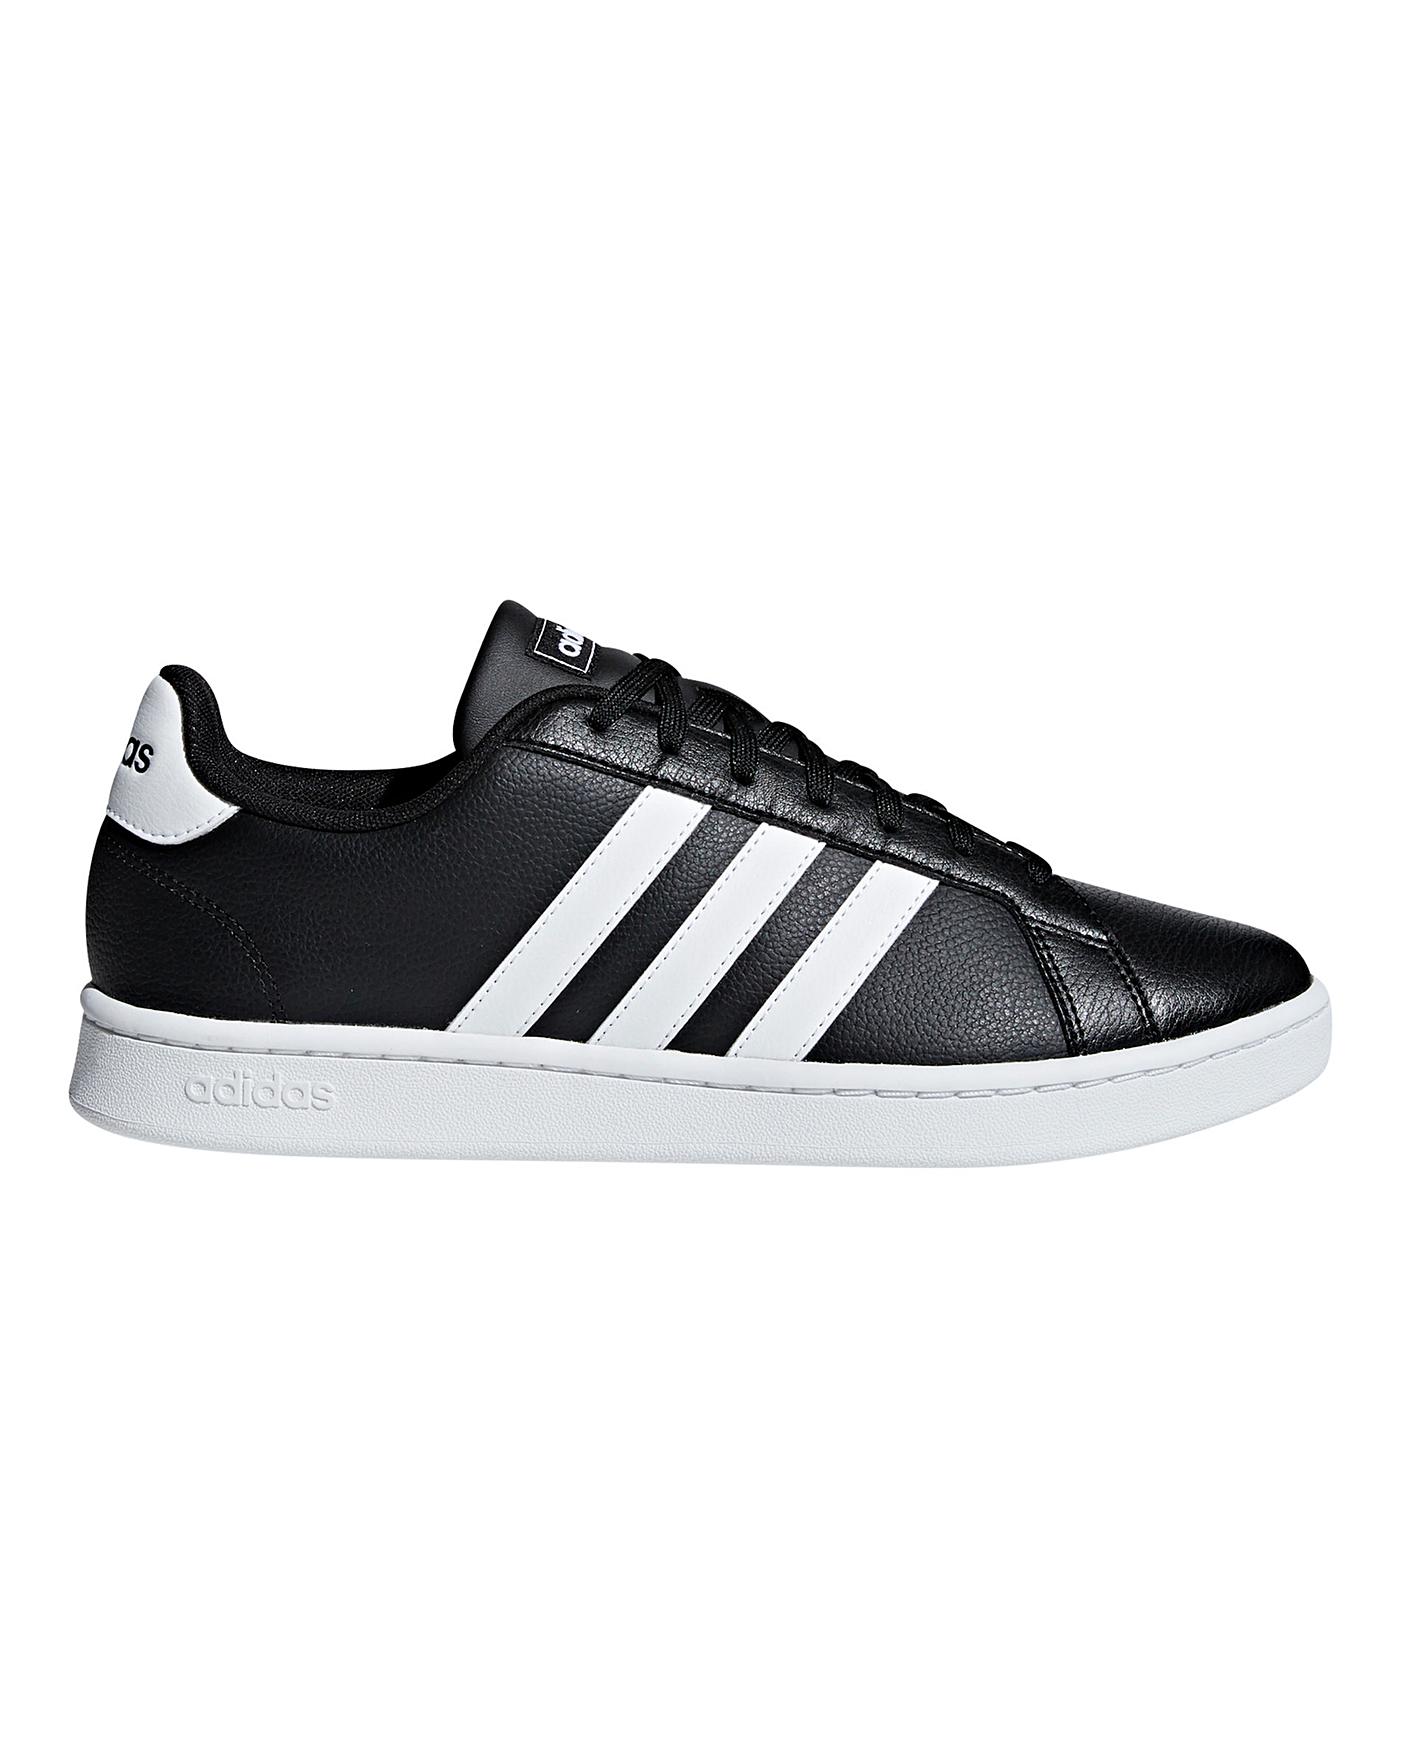 adidas Grand Court Trainers | J D Williams